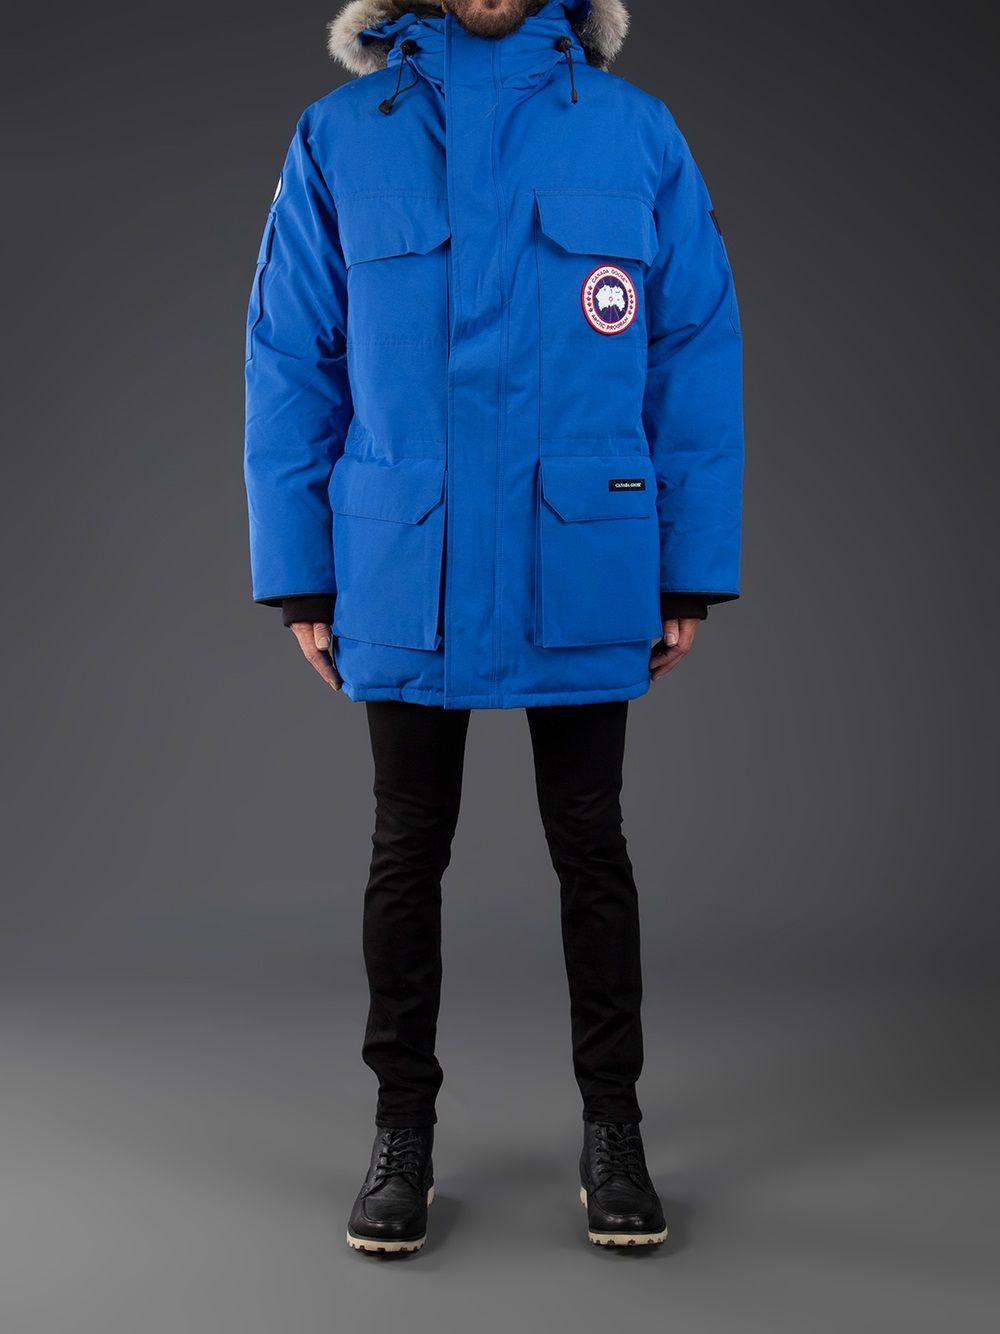 Canada Goose Expedition Parka in Blue for Men - Lyst